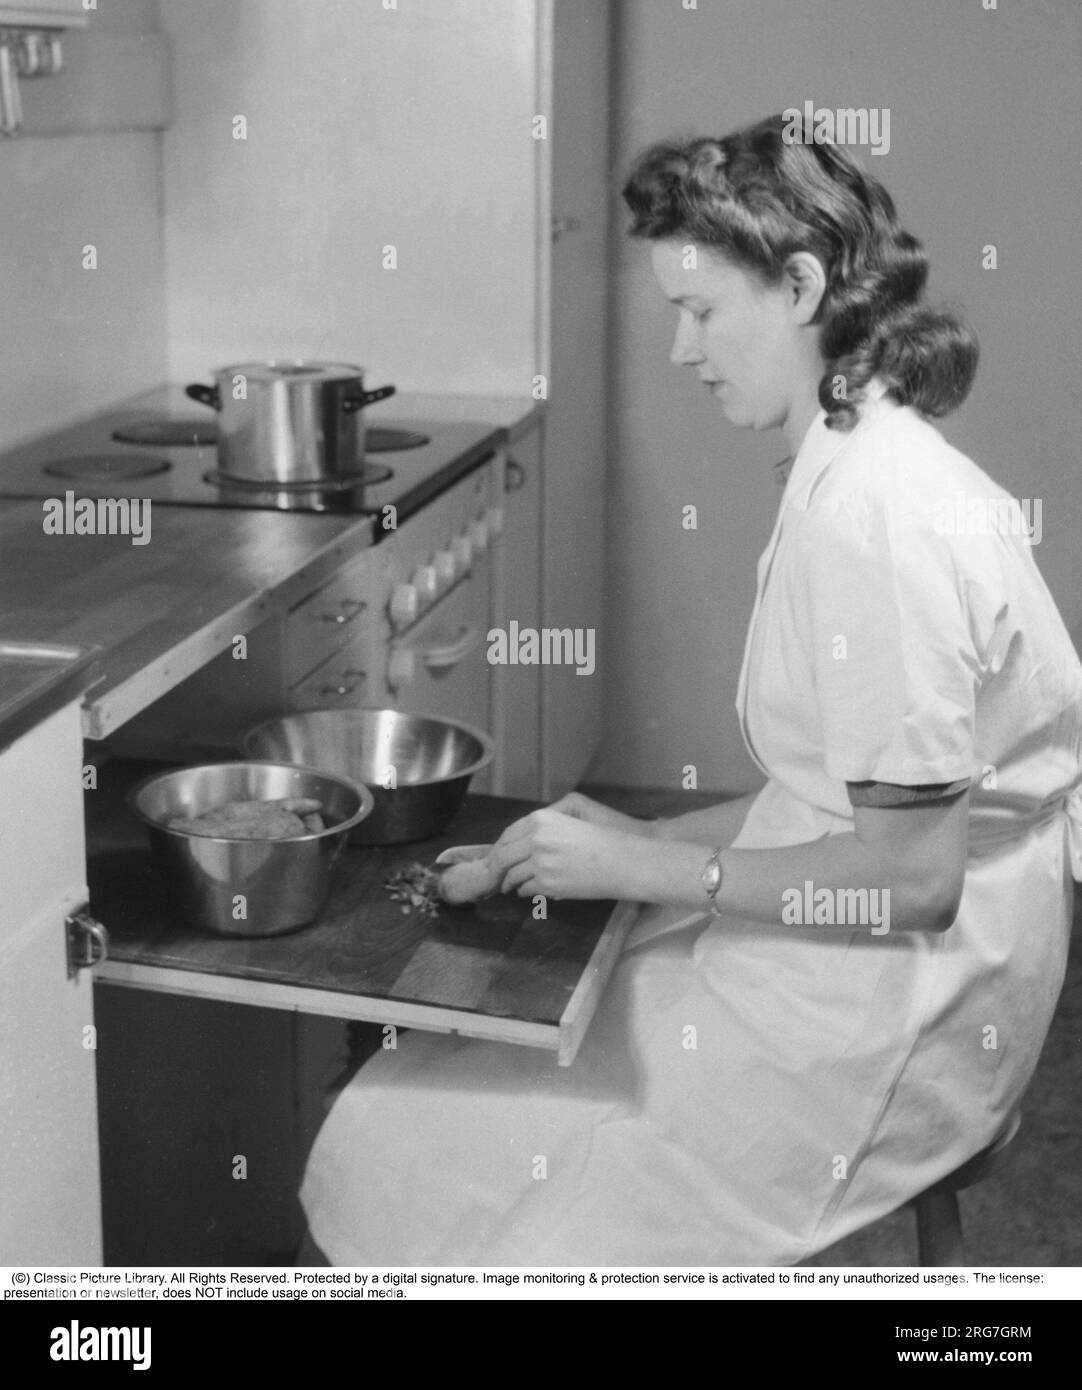 In the 1940s. An woman is seen sitting at the practical extendable cutting board, preparing the ingredients for a a dinner meal. Sweden 1944. Stock Photo